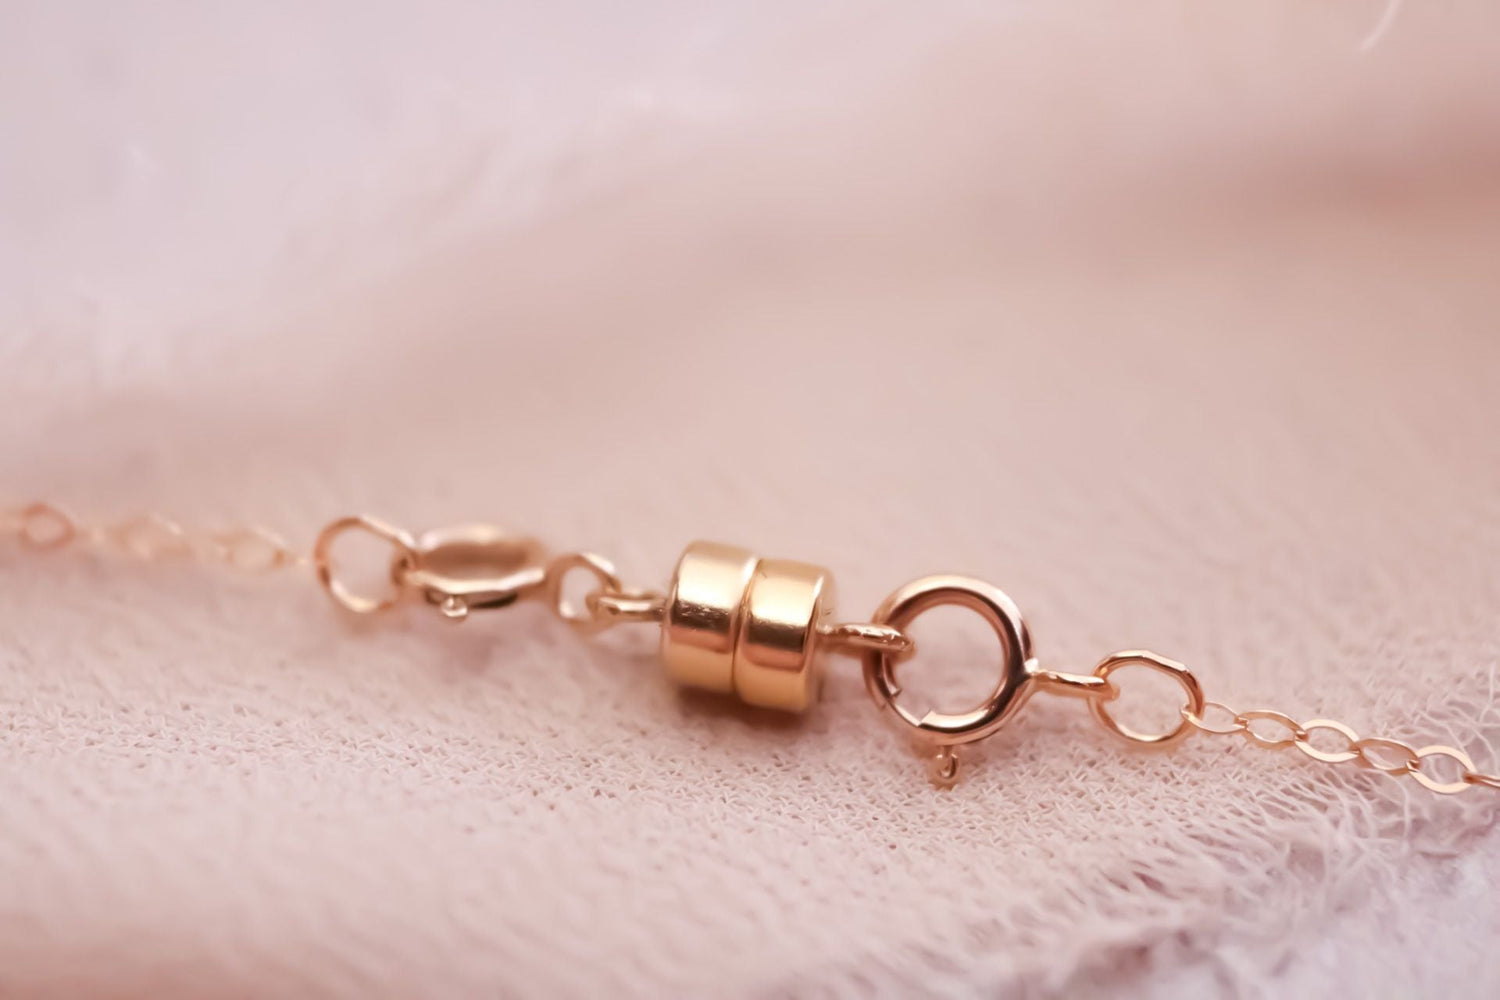 Magnetic Clasp - TickleBugJewelry